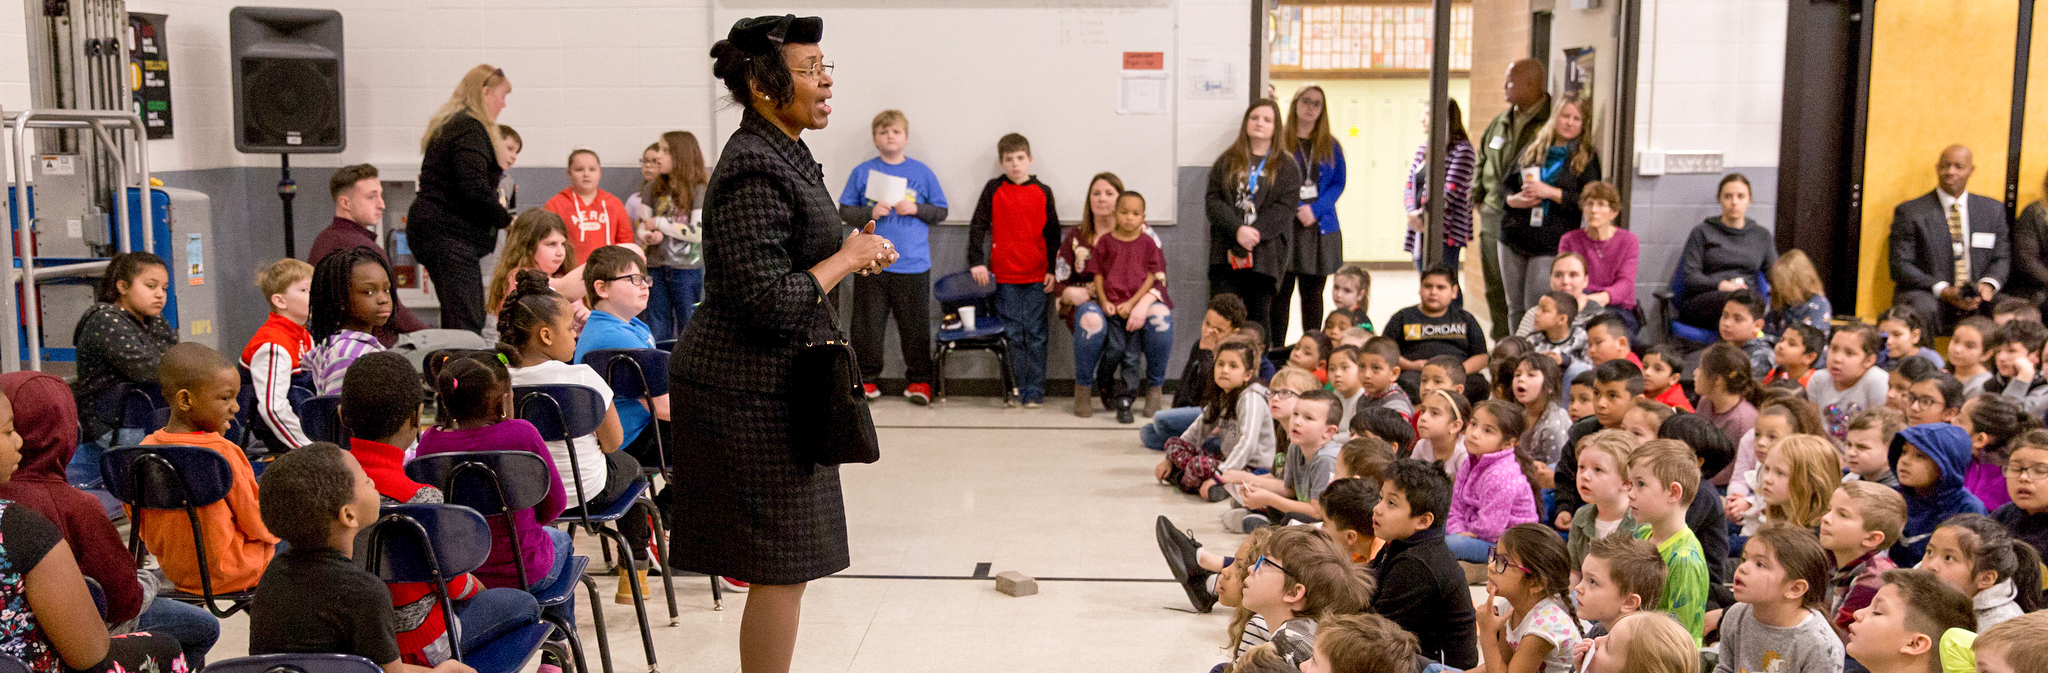 Black History Comes to Life at Jackson Elementary School